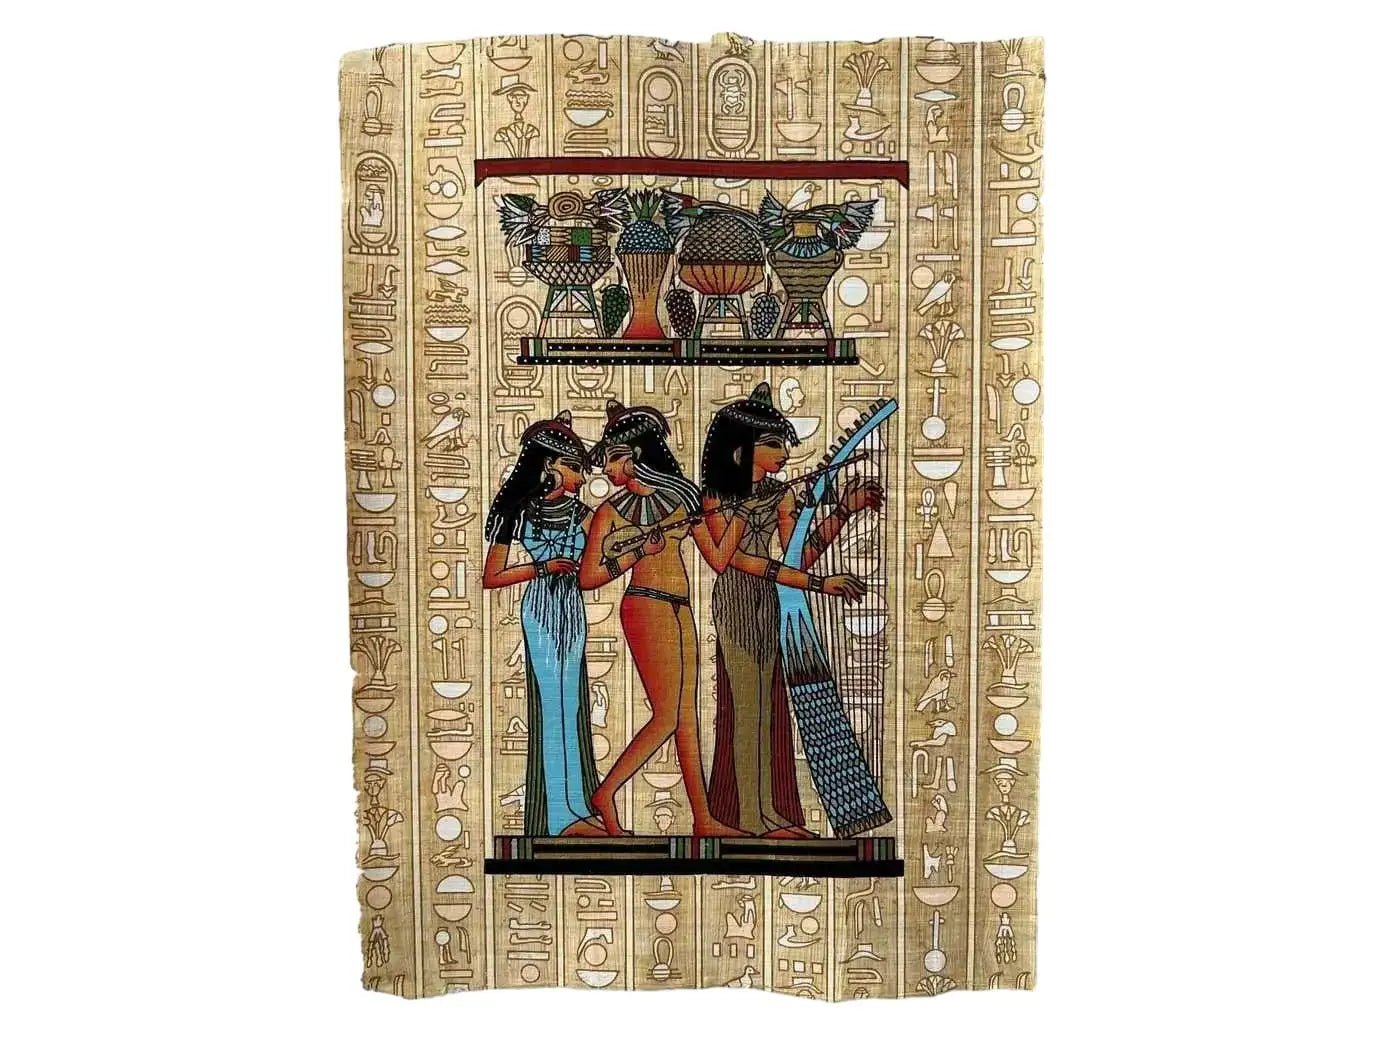 Egypt Art Musicians of Amun - Gift for Music Lovers - Bedroom Wall Art - Authentic Hand Painted